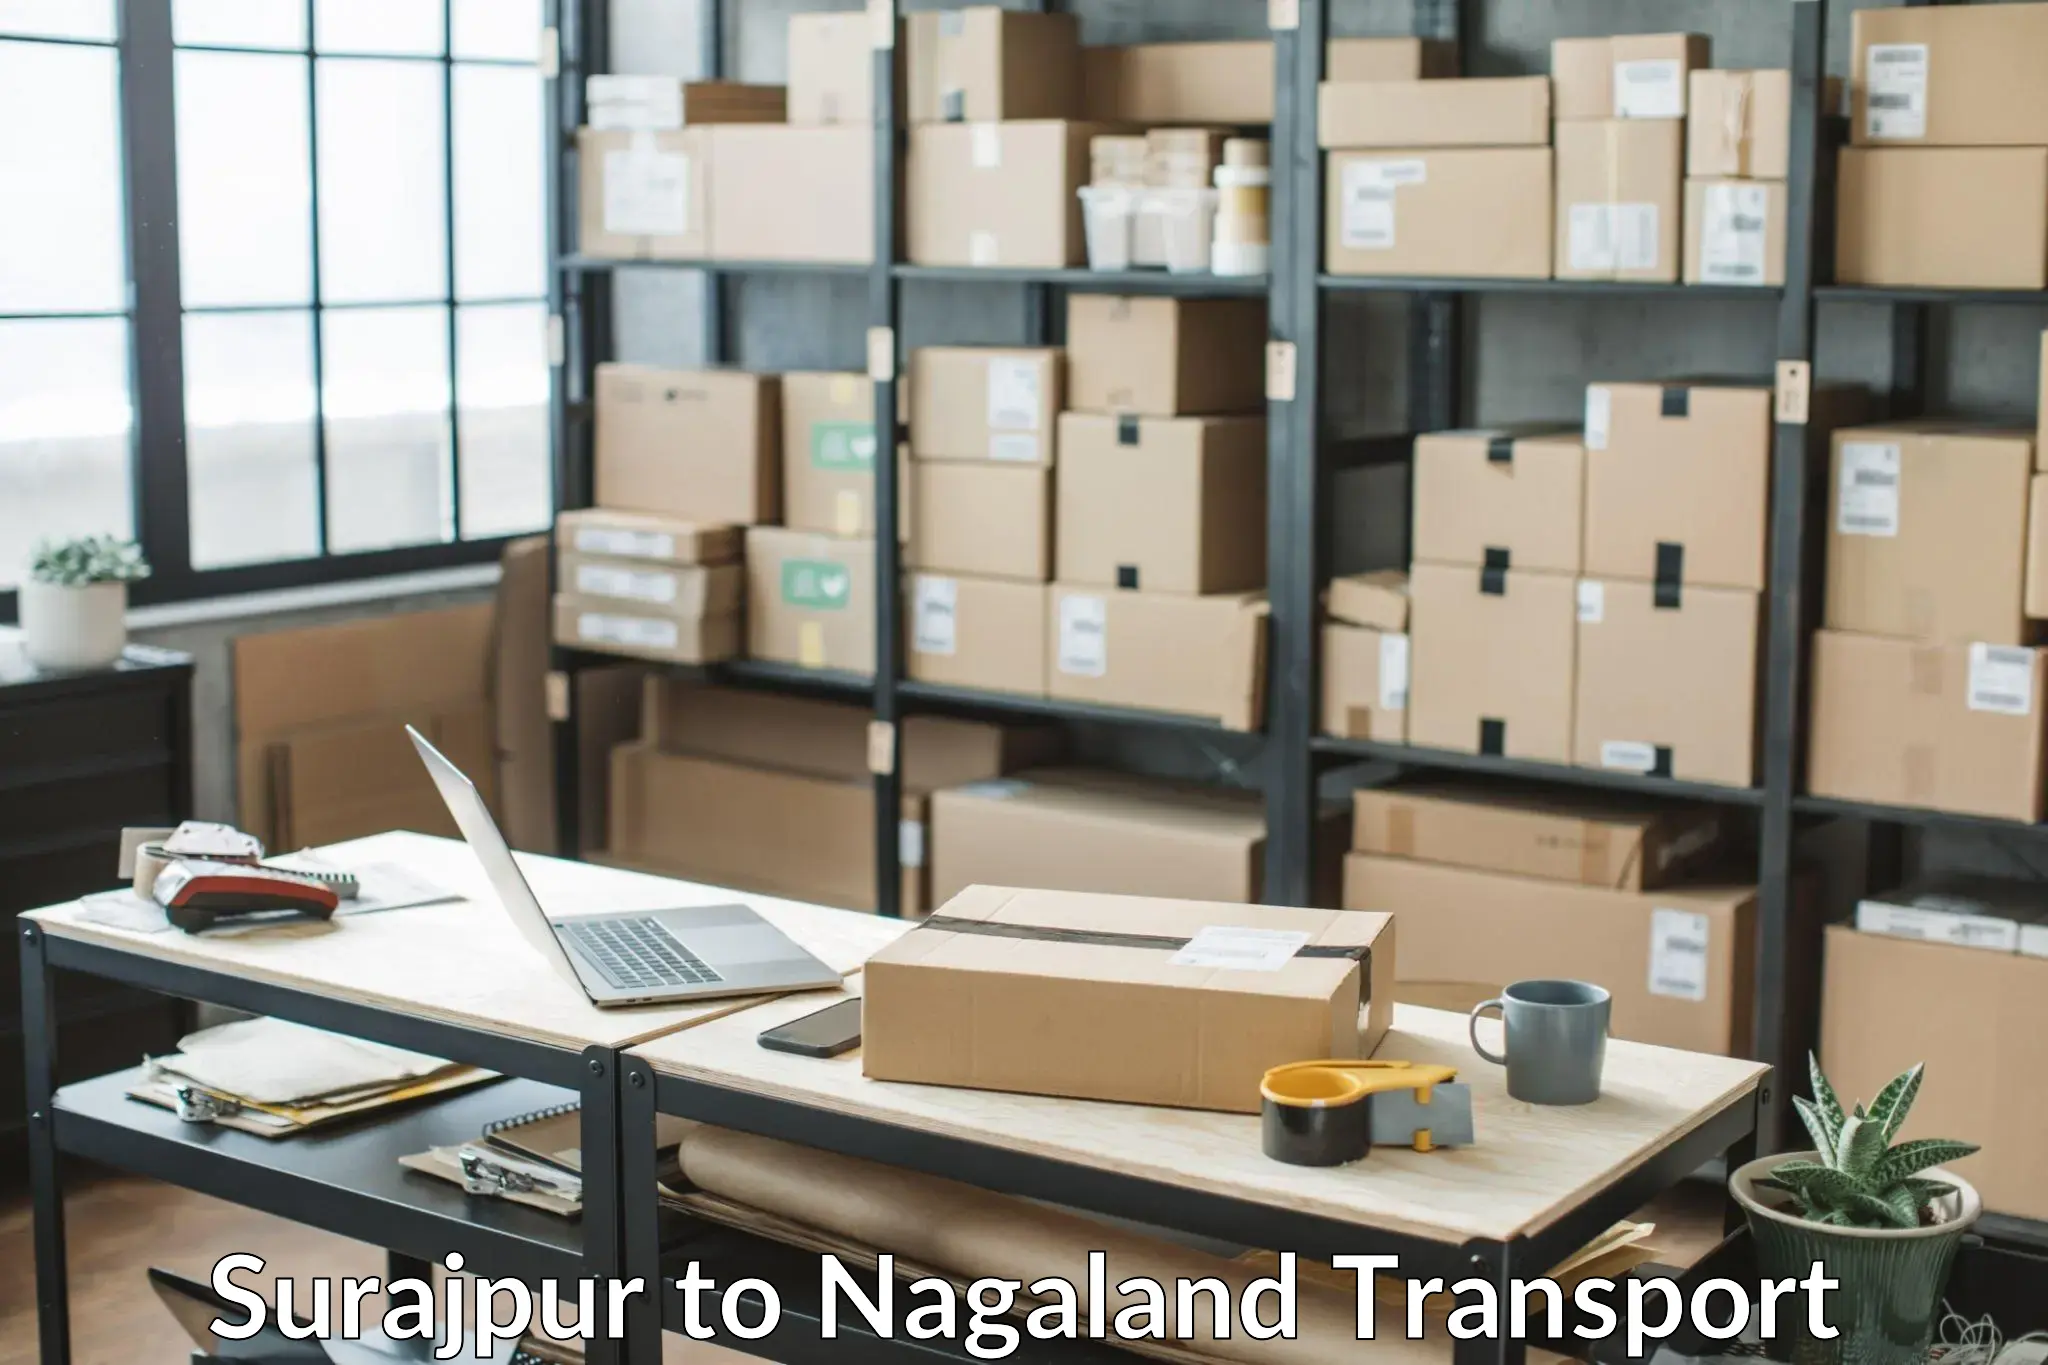 Daily transport service Surajpur to Nagaland